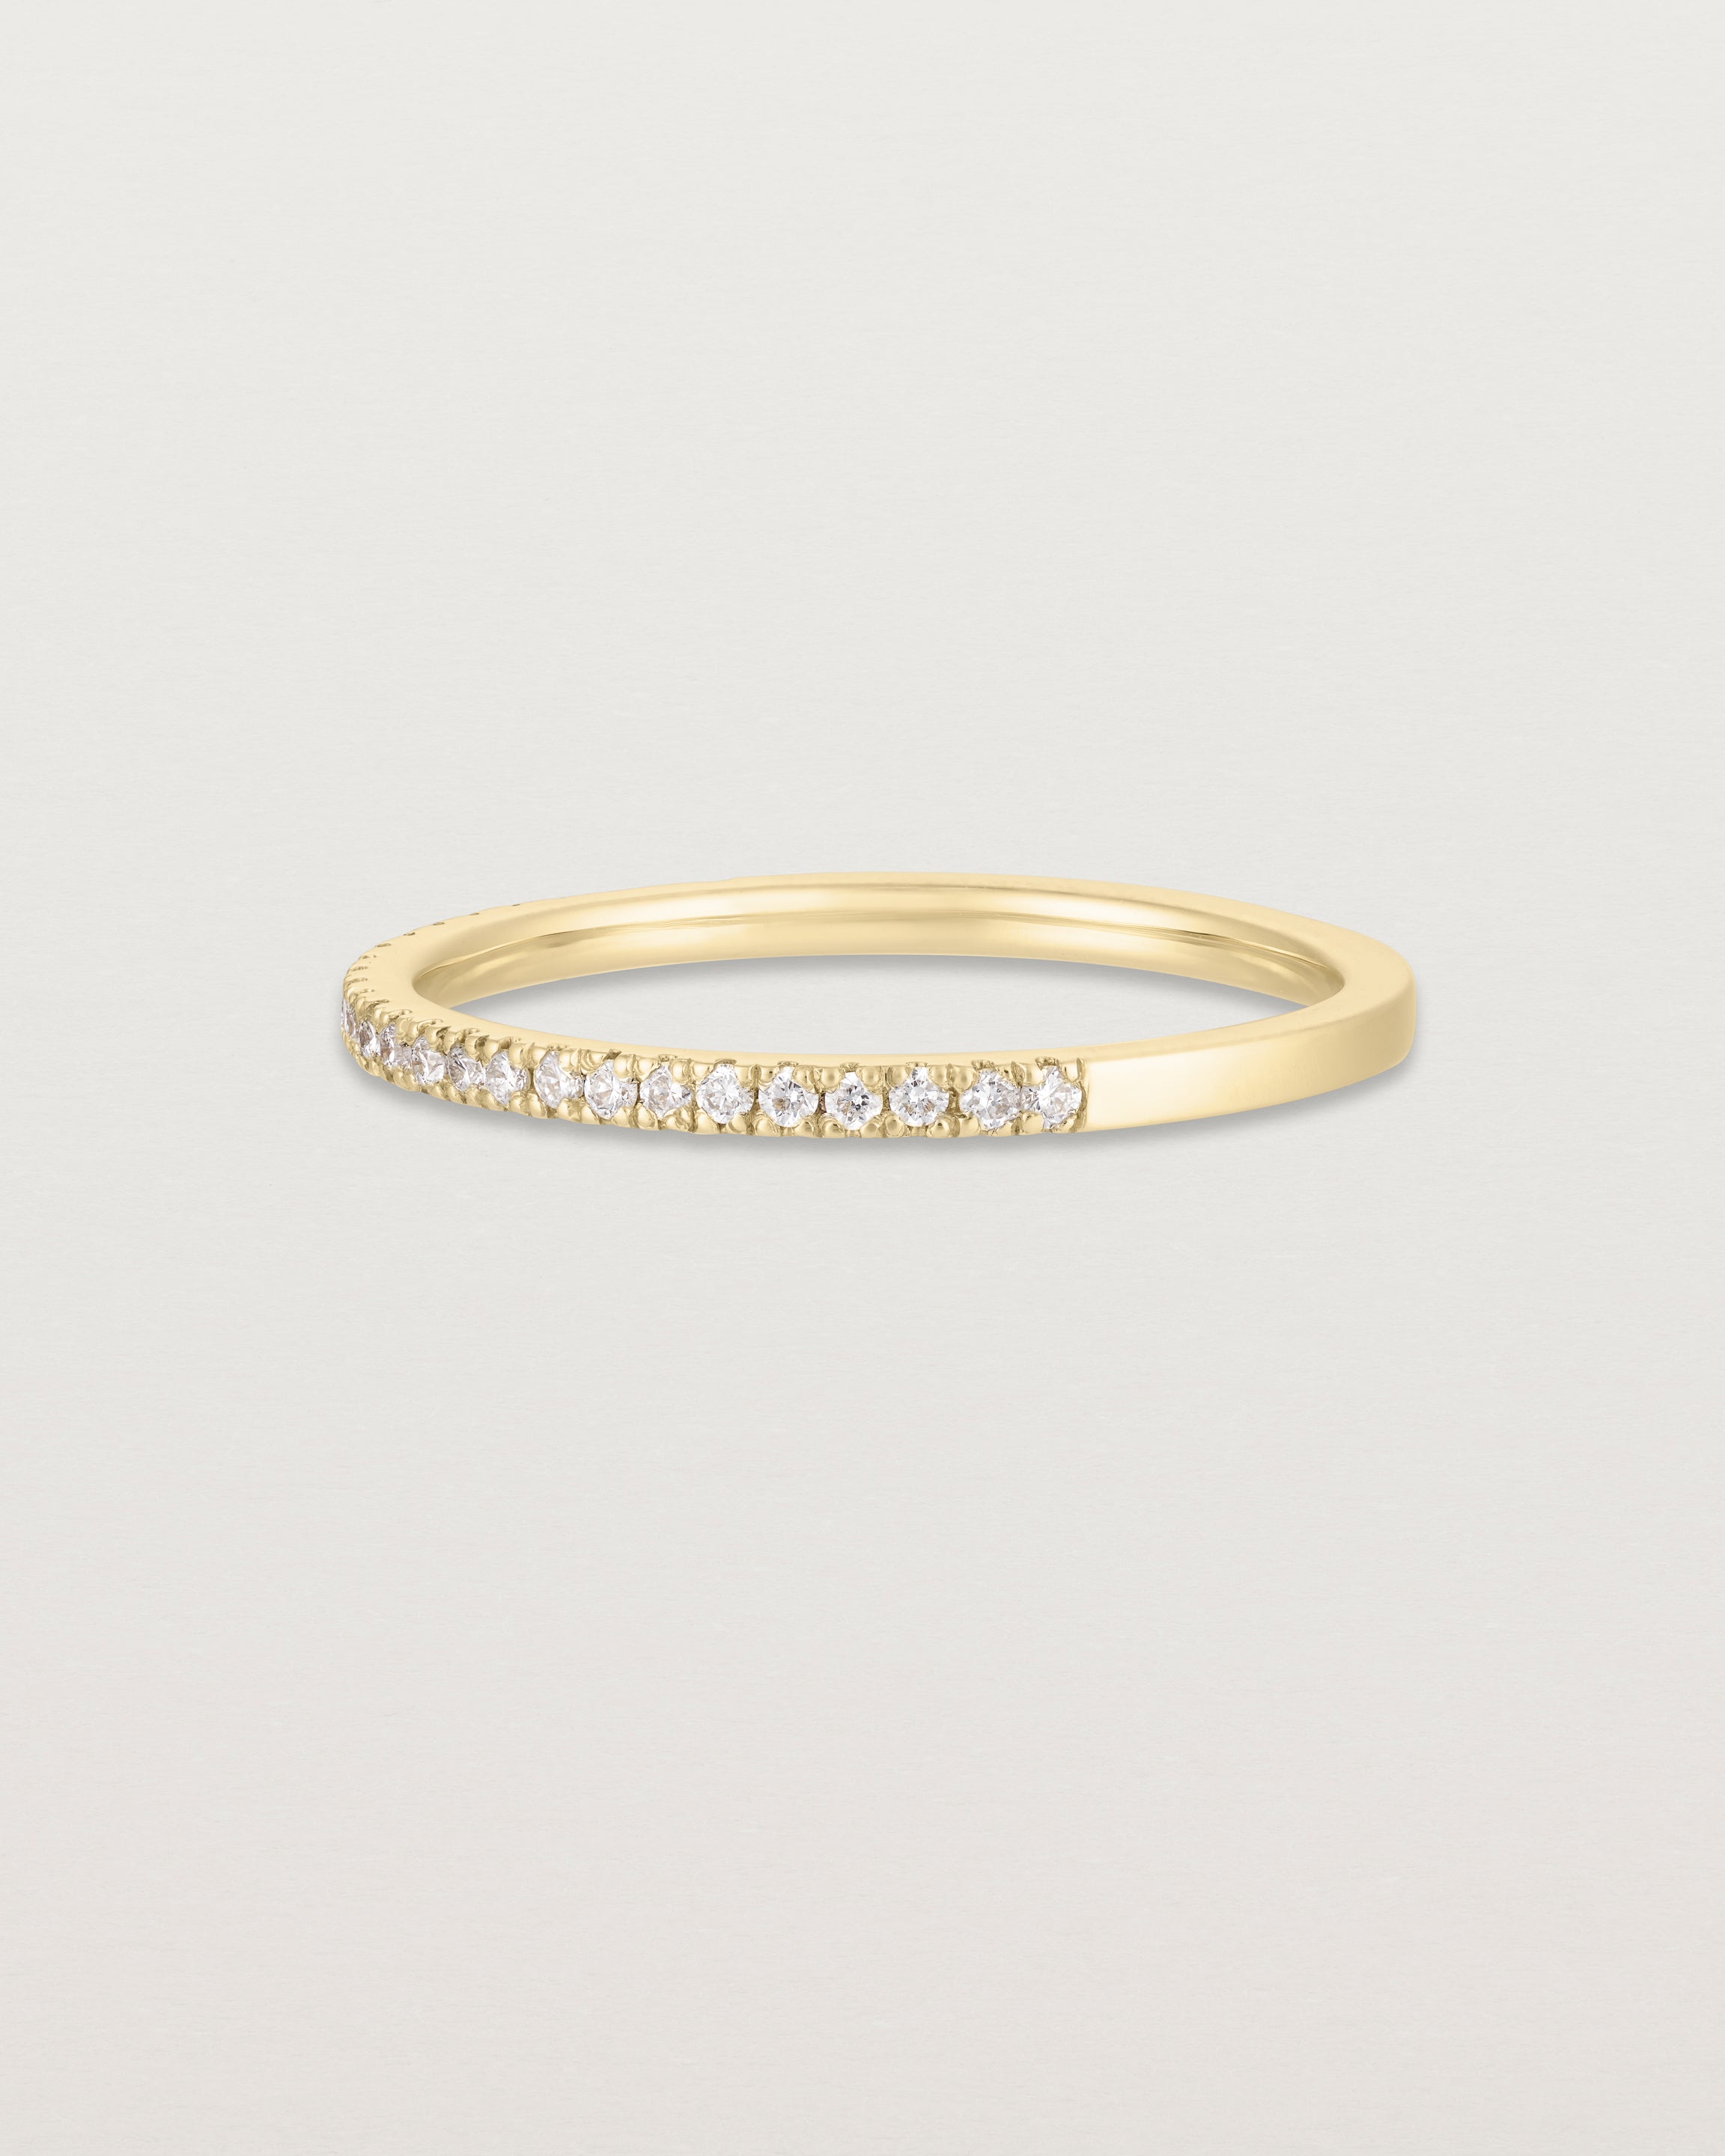 Angled view of the Demi Queenie | White Diamonds in yellow gold.